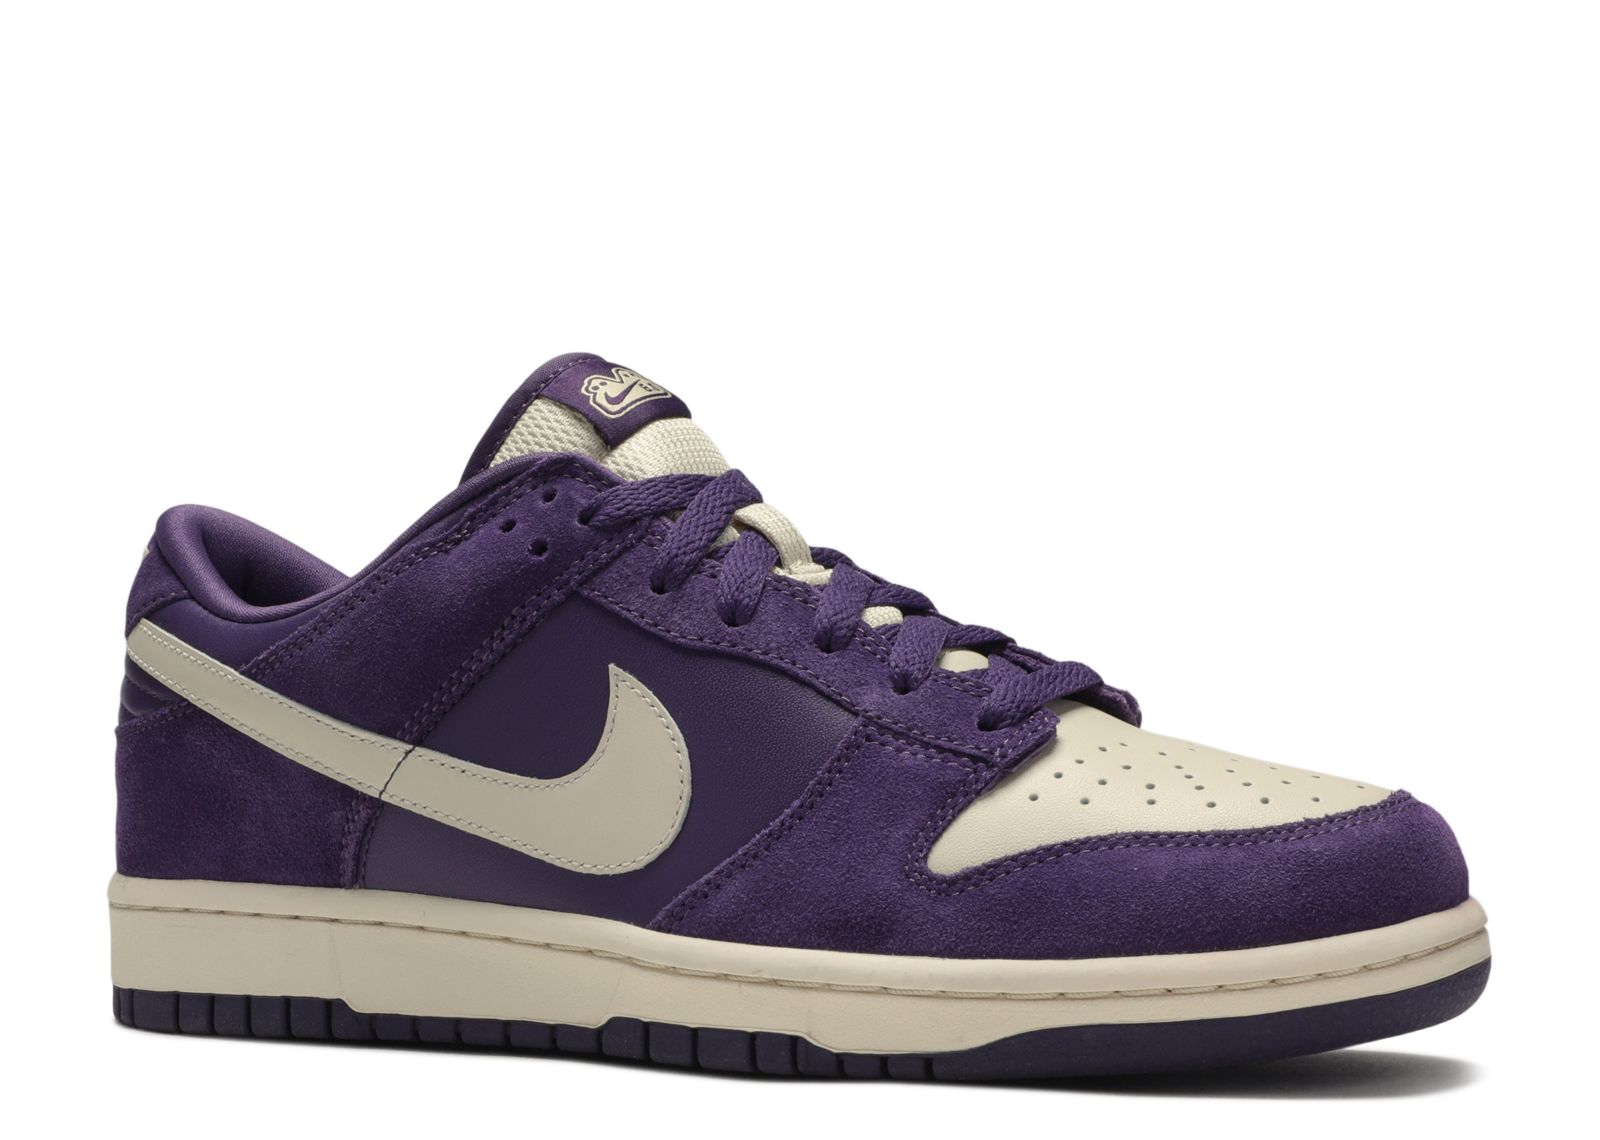 Airbrushed Purple Details Accent This Light Blue Nike Dunk Low